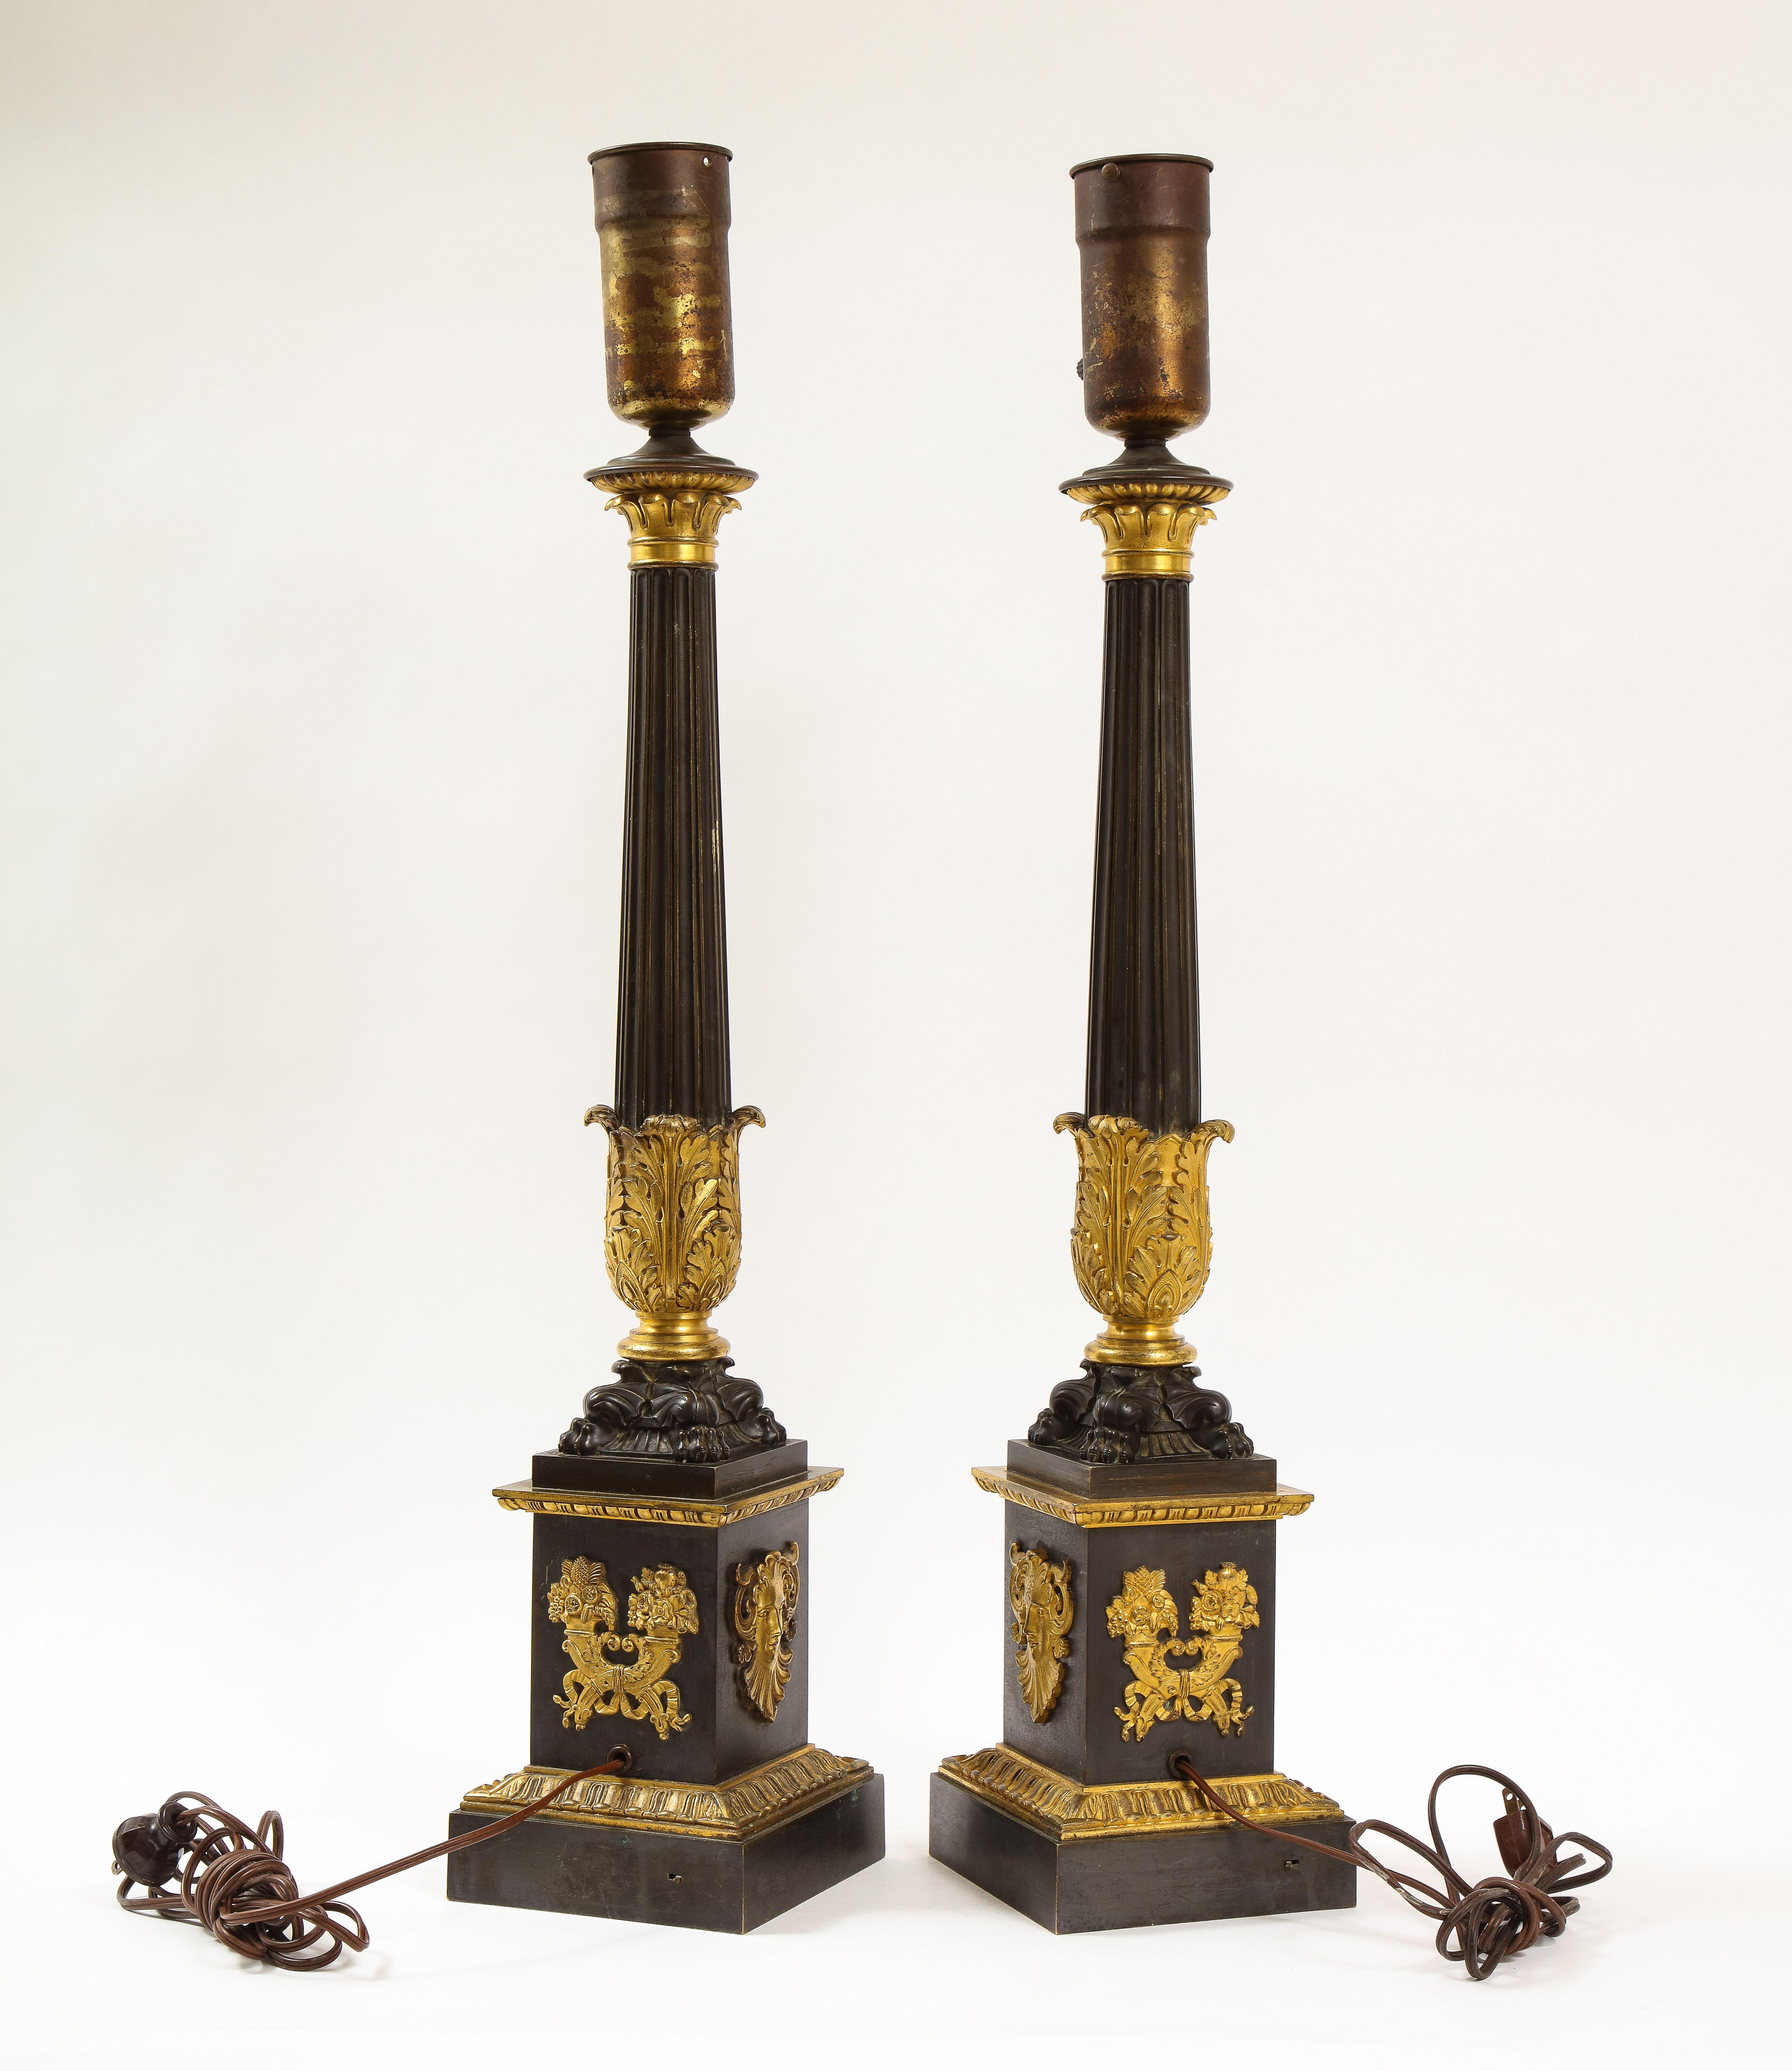 19th Century Pr. French Empire Period Patinated & Dore Bronze Candlesticks Turned to Lamps For Sale